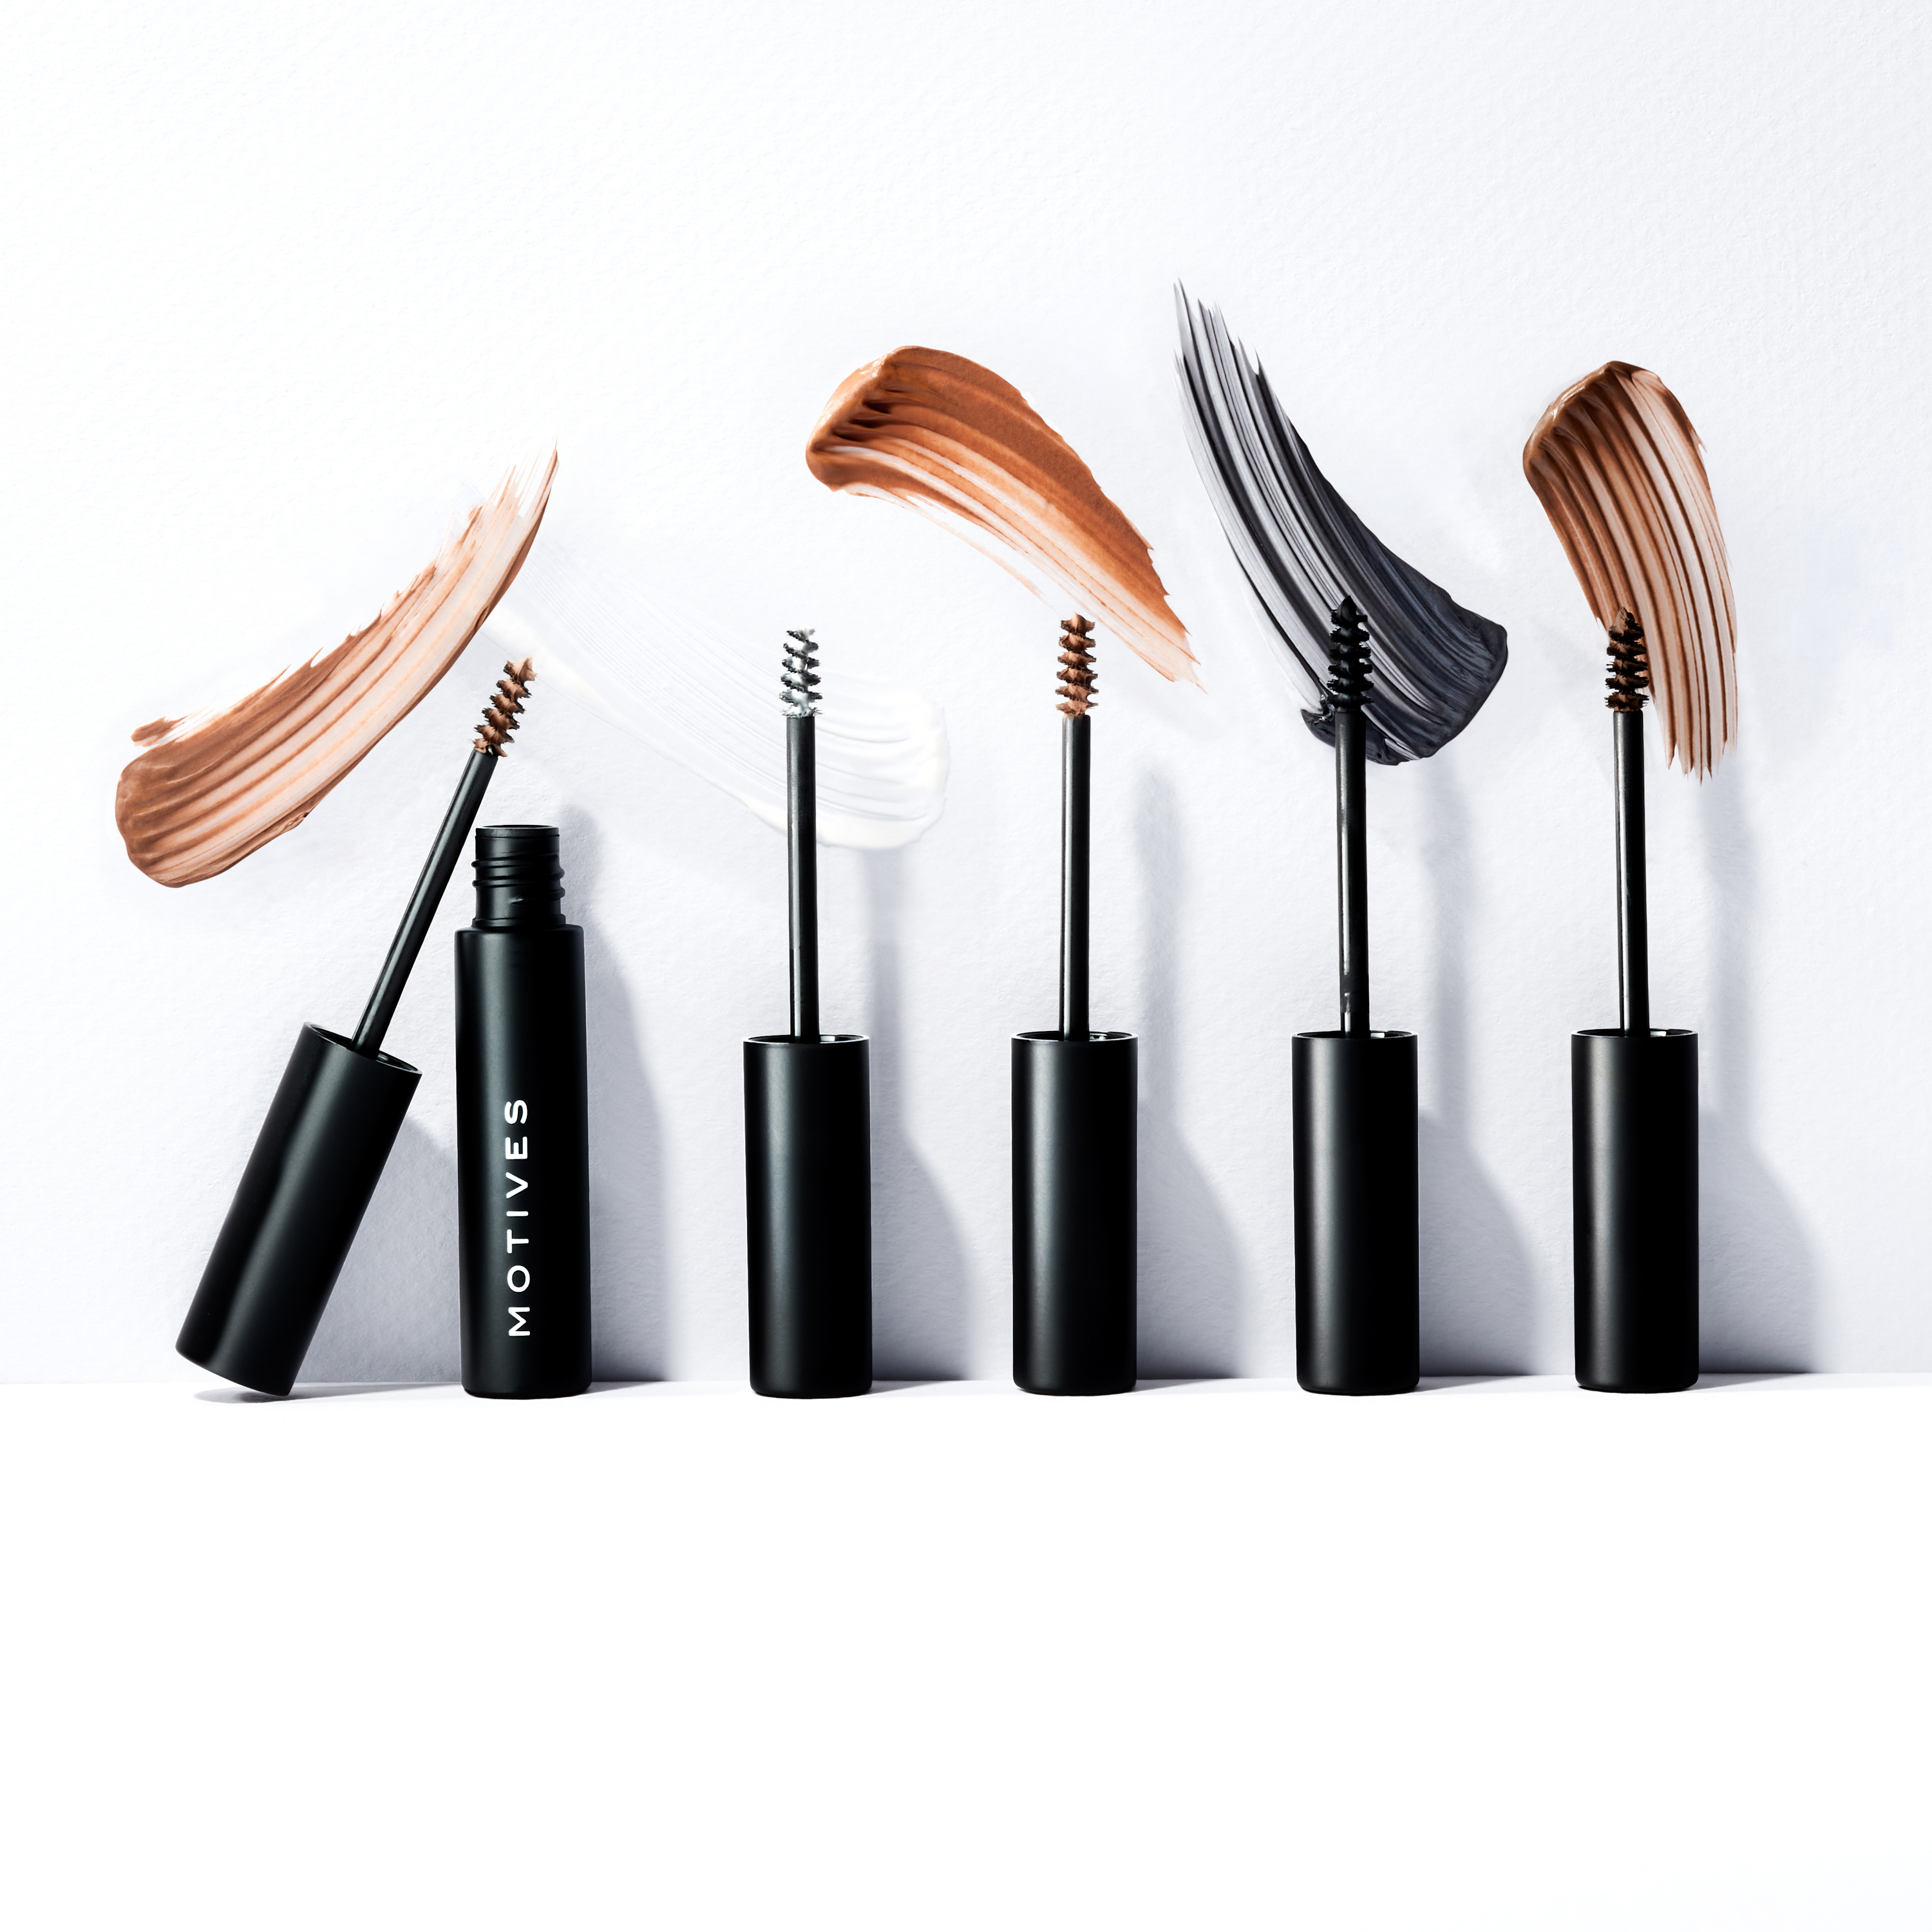 All 5 shades of Motives Gel-ous Brow Gel side by side with spoolie applicator and swatches of each shade shown.